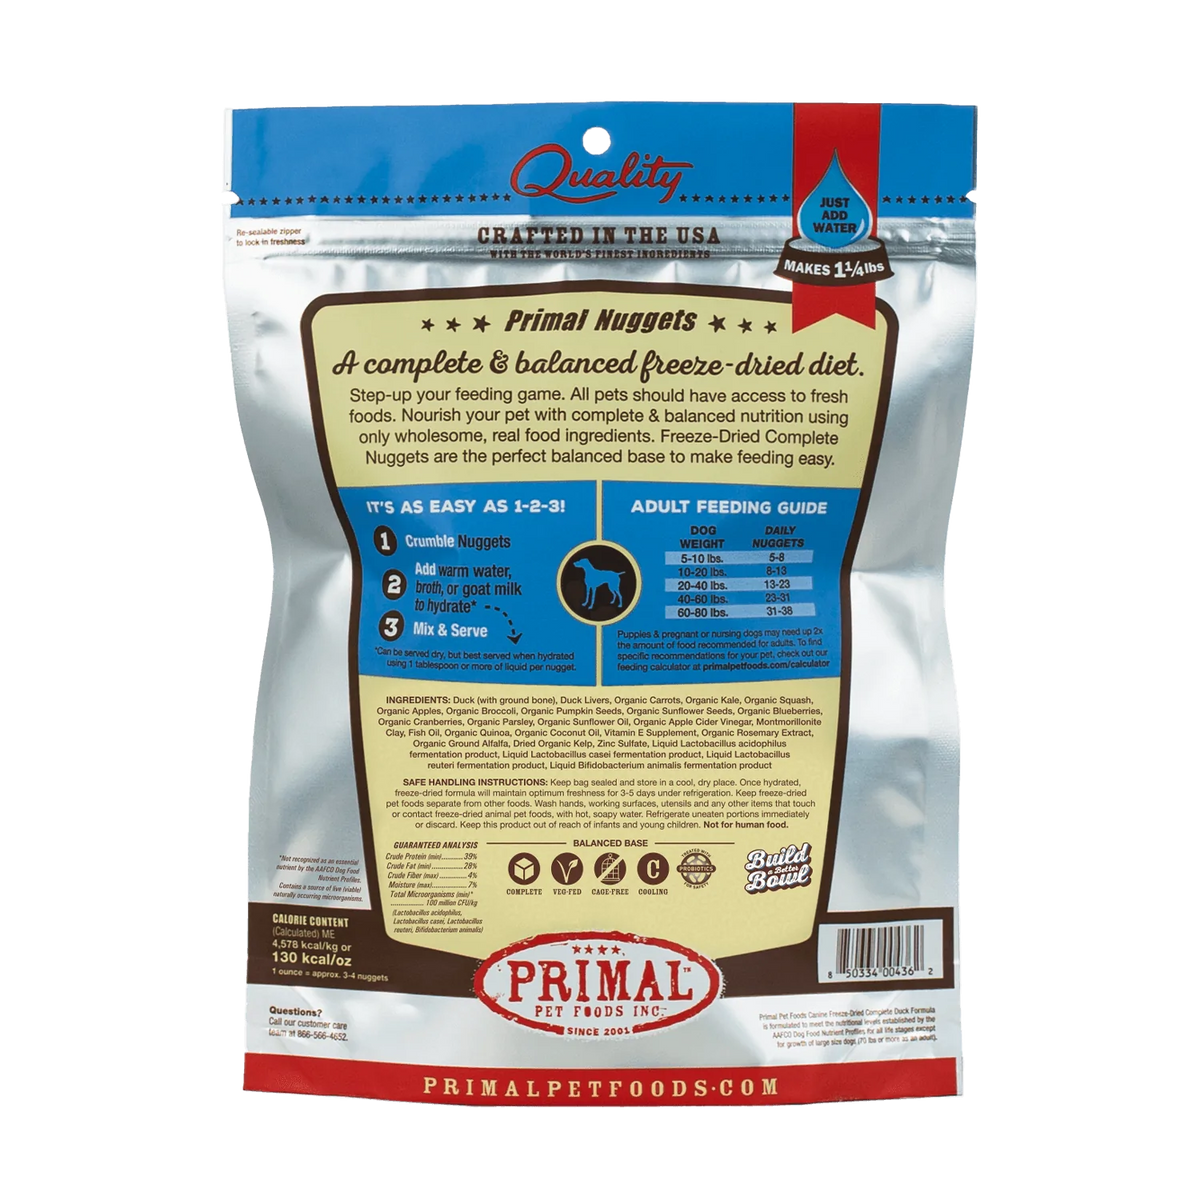 Primal Canine Freeze Dry Duck Nuggets 14oz-Four Muddy Paws